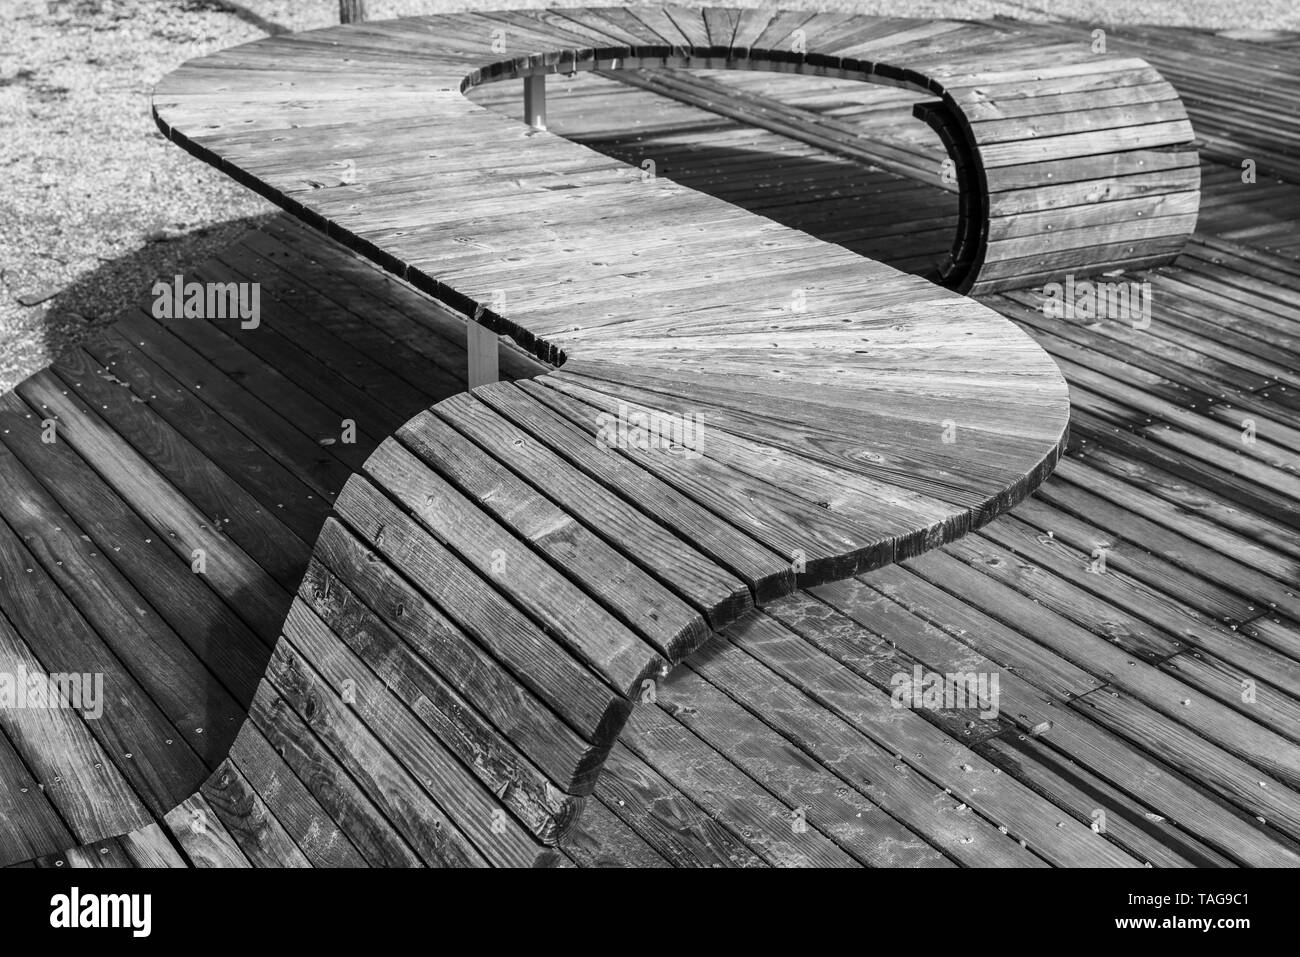 Black white image of modern geometric wooden construction intended as seating, Germany Stock Photo